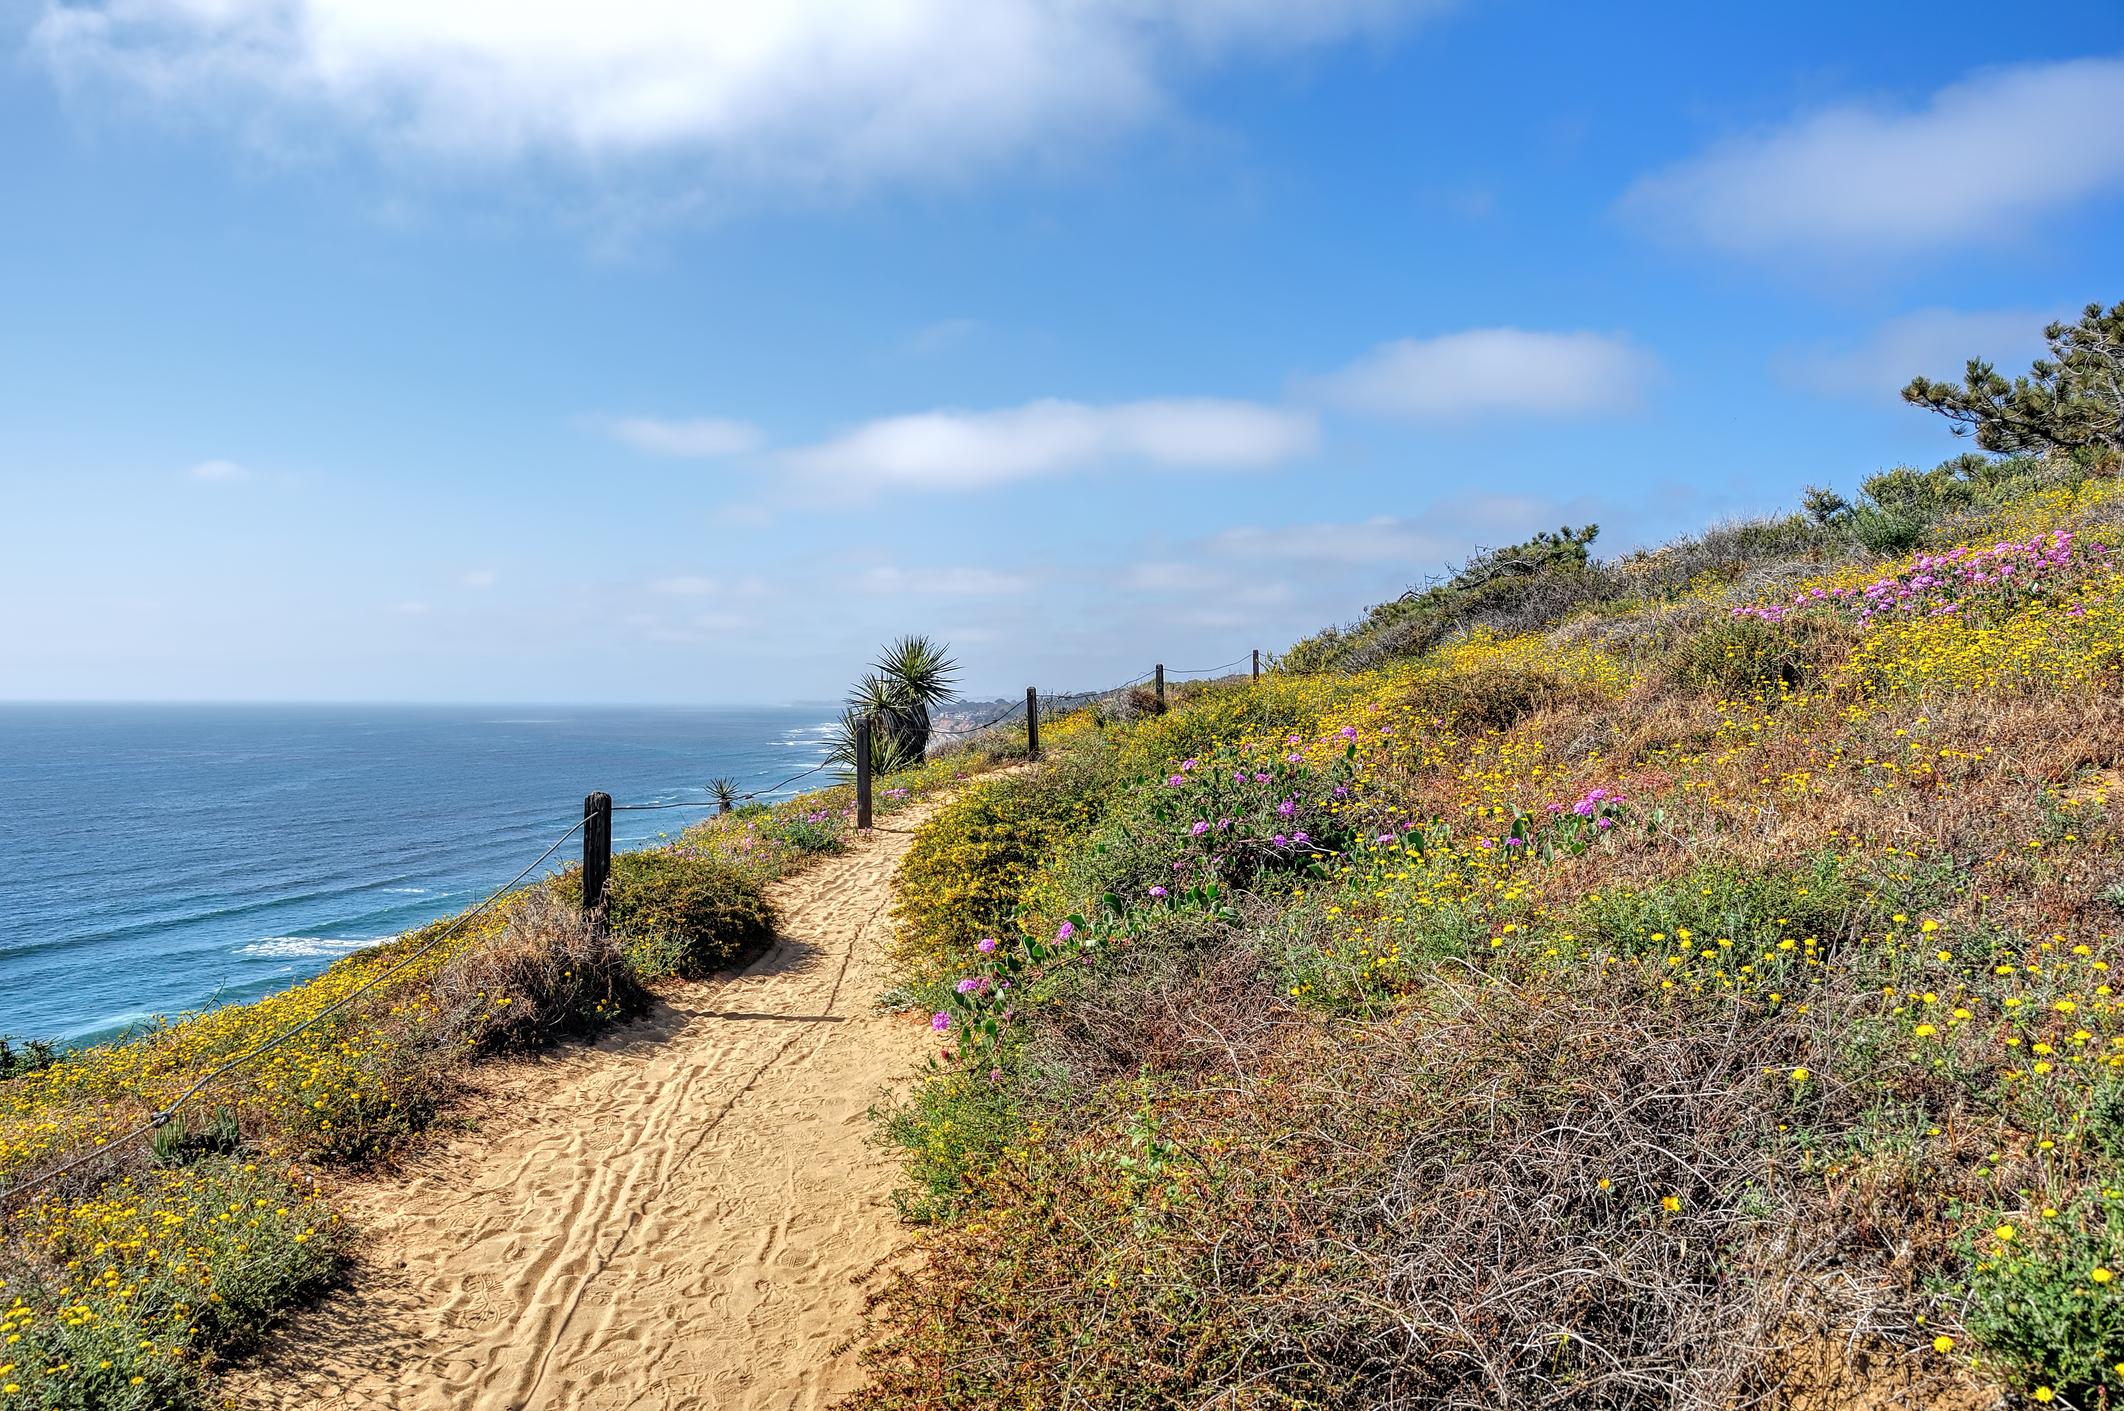 From the trails at Torrey Pines